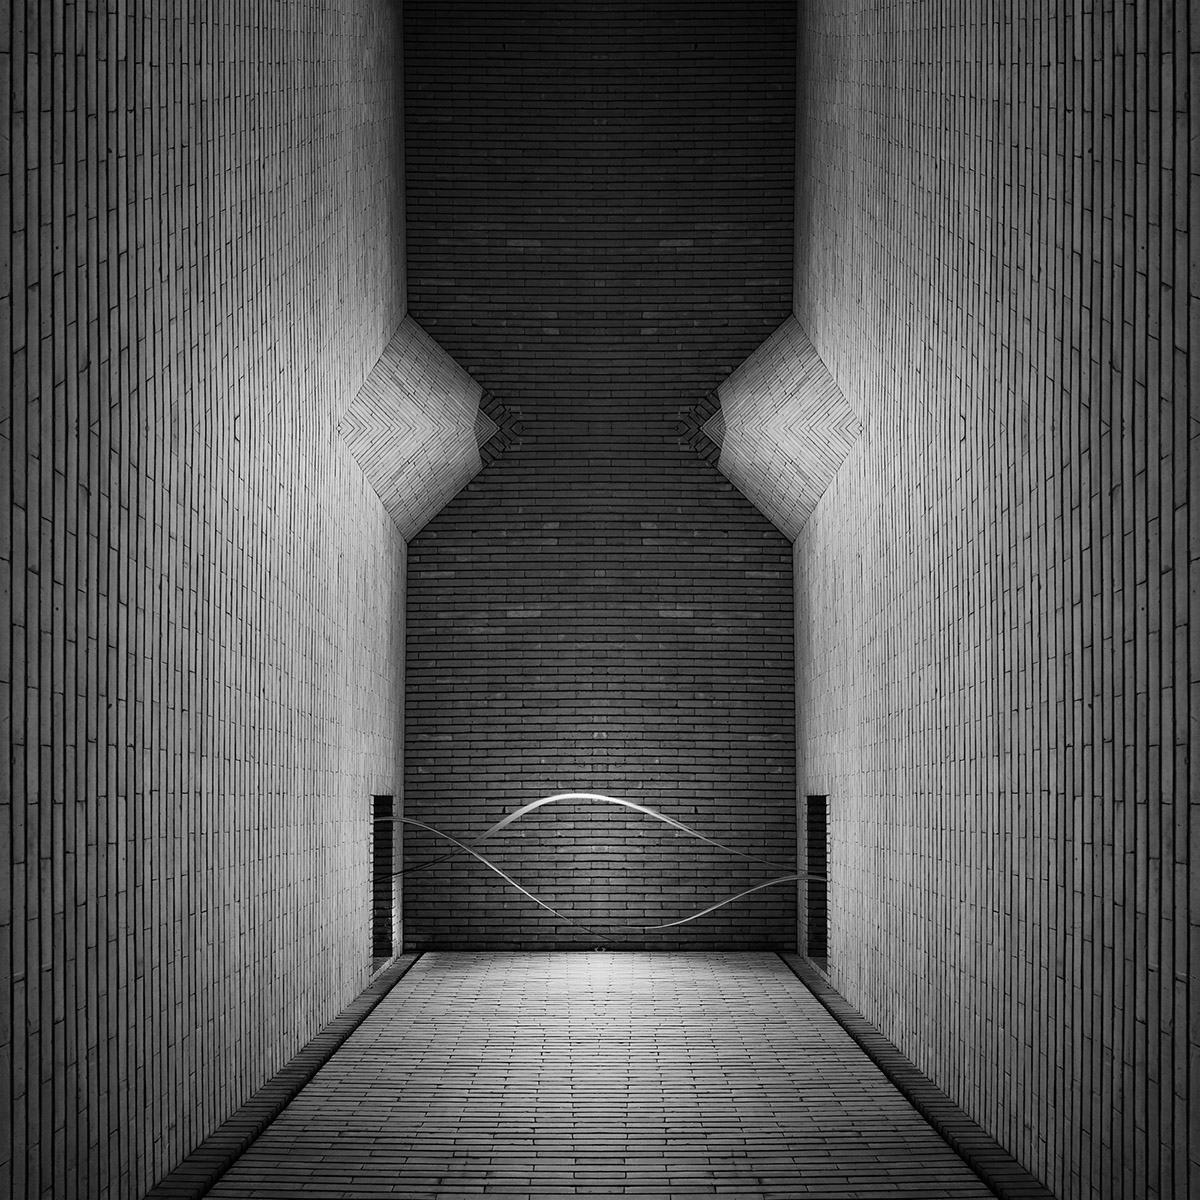 thespaceinbetween milad safabakhsh FINEART Minimalism creative holography science